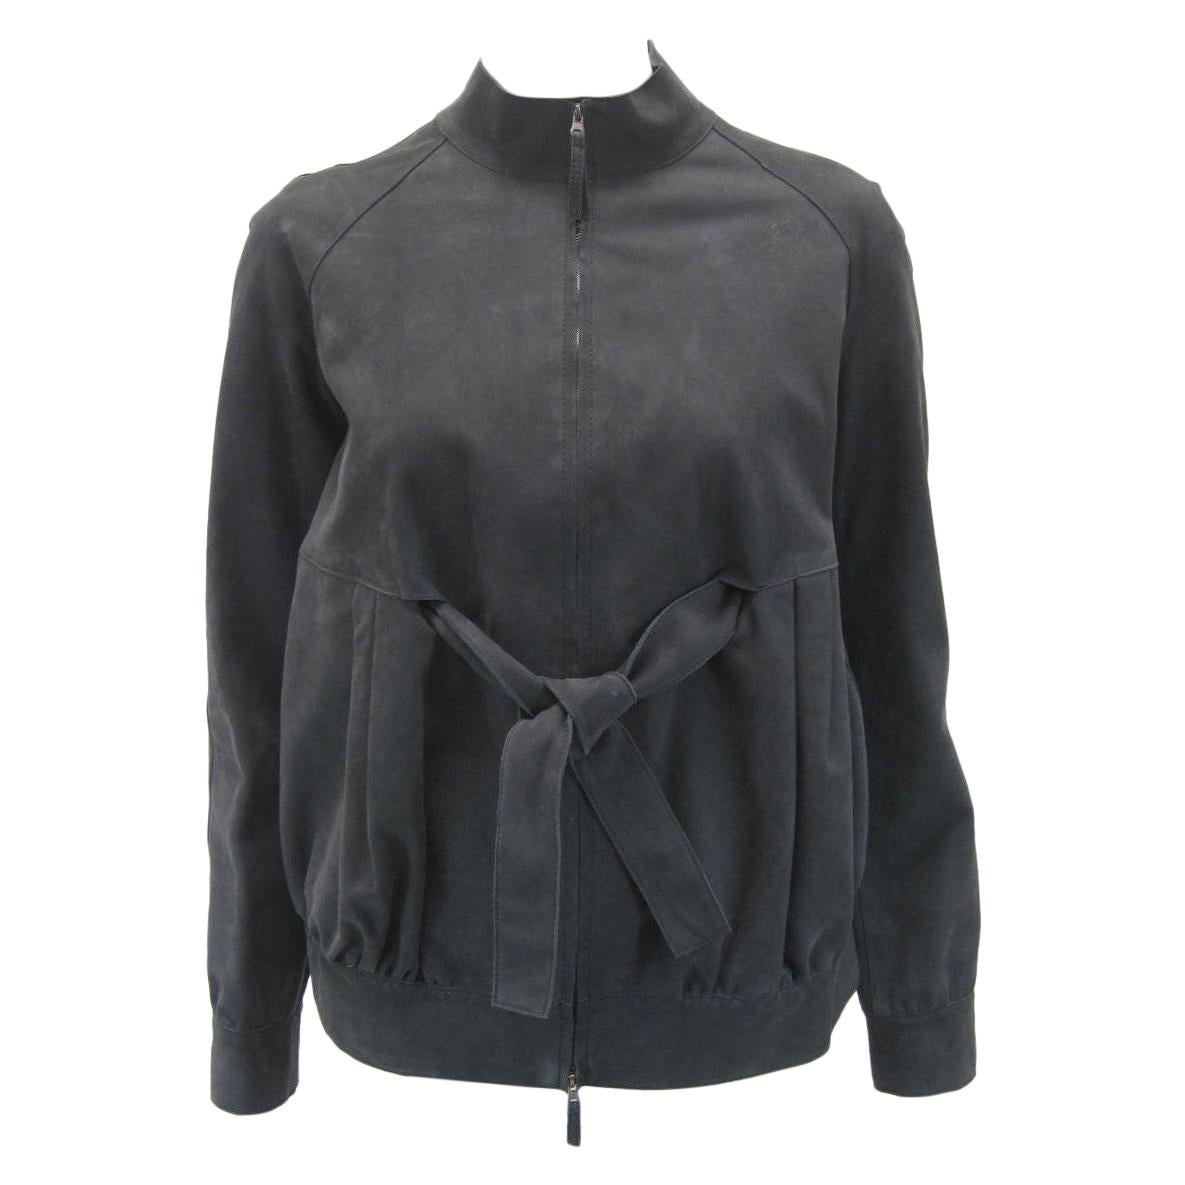 Marni Soft Black Gathered Suede Jacket with Inside Tie